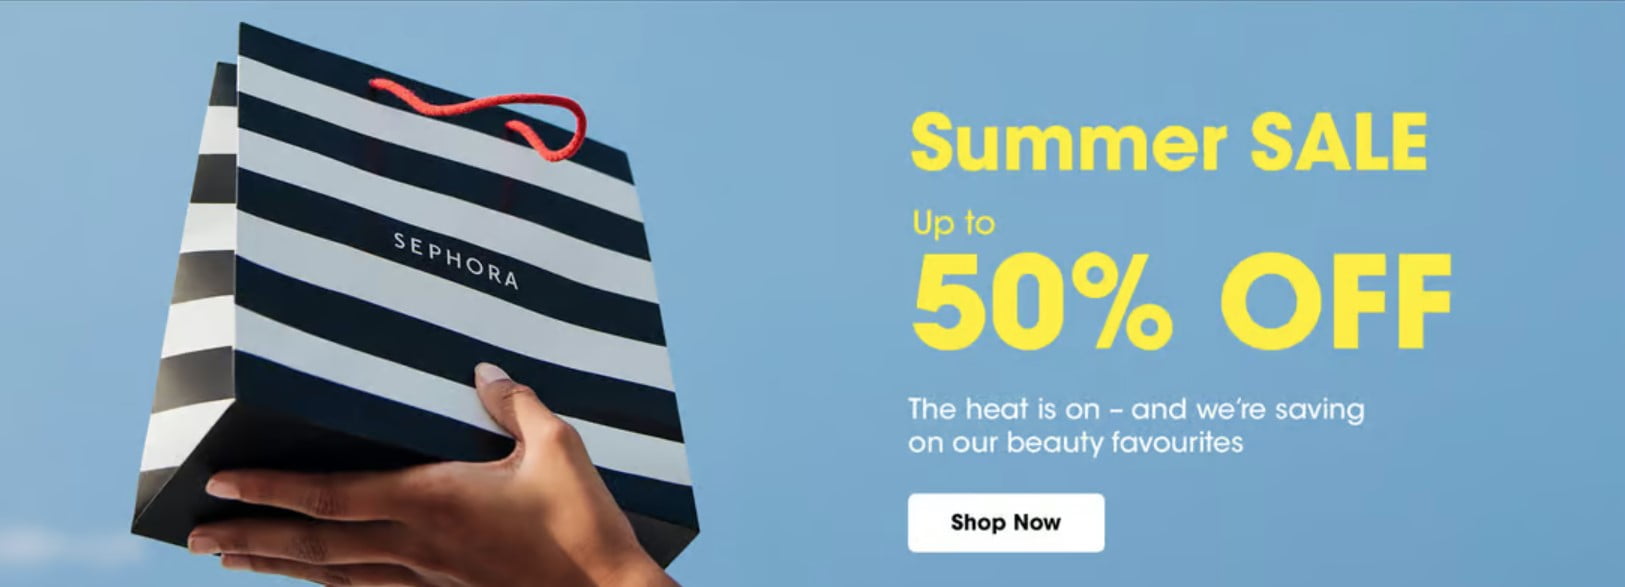 Up to 50% off summer sale at Sephora UK